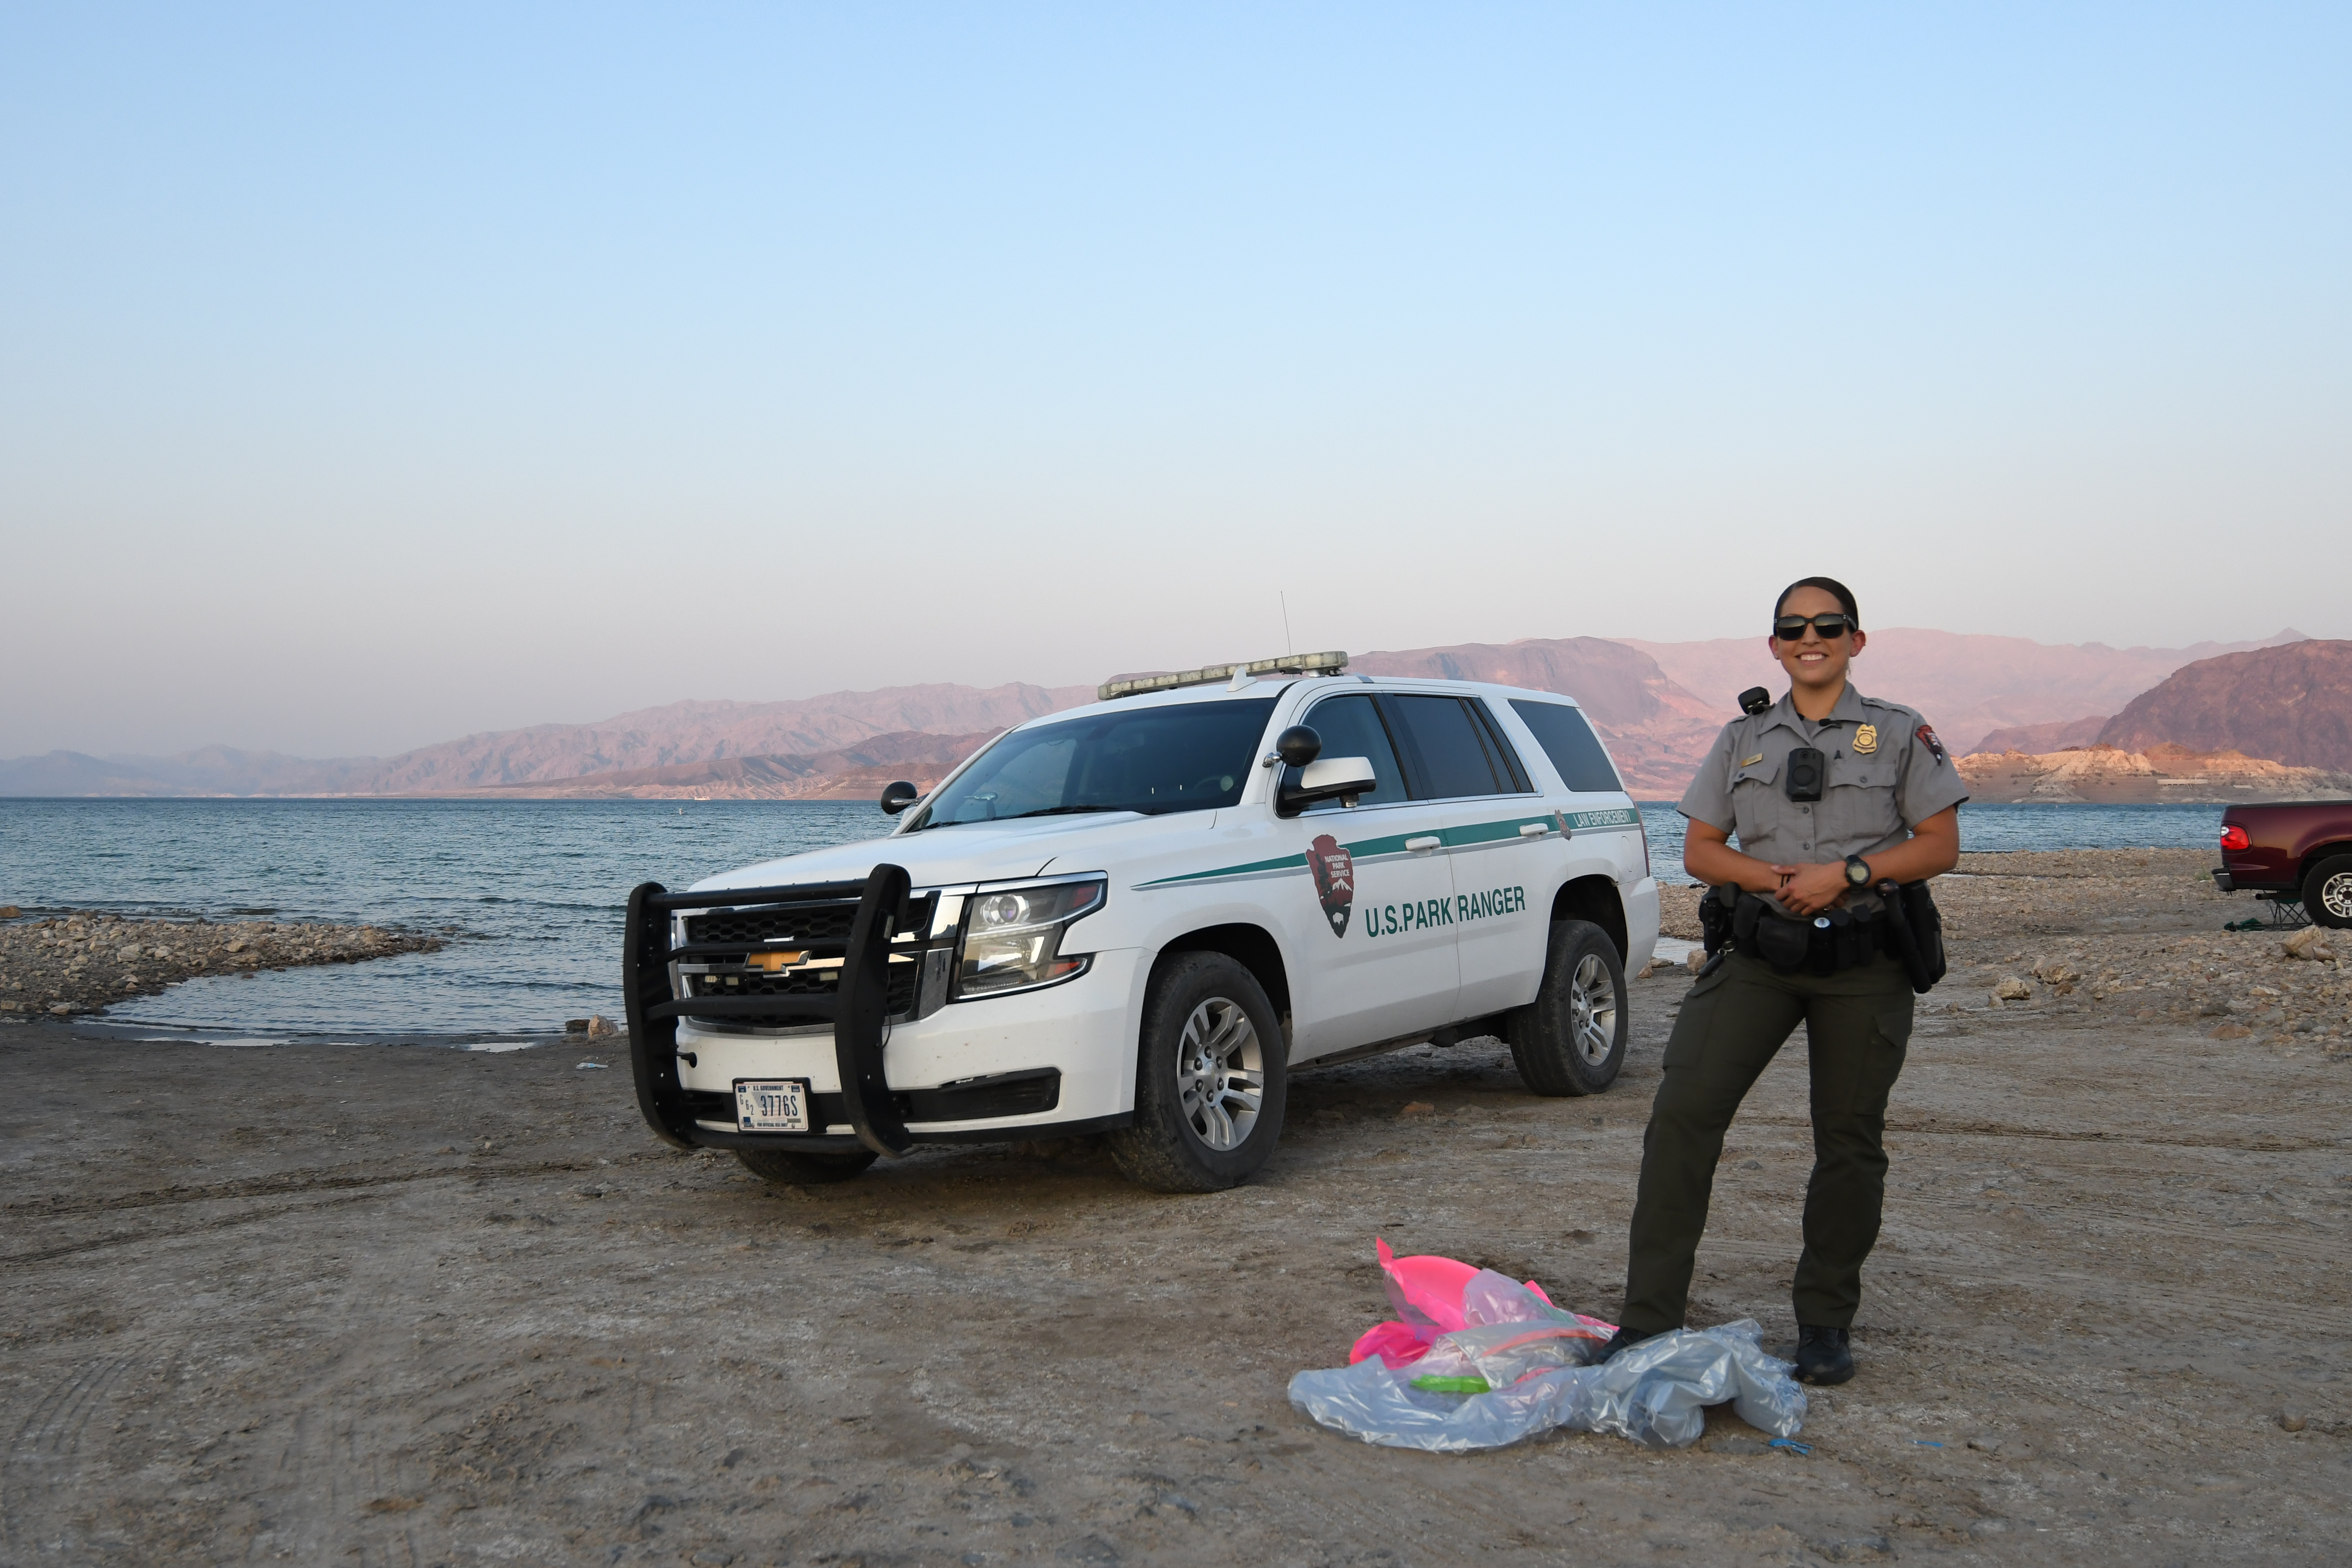 Park ranger with pool float with SUV and lake in background.